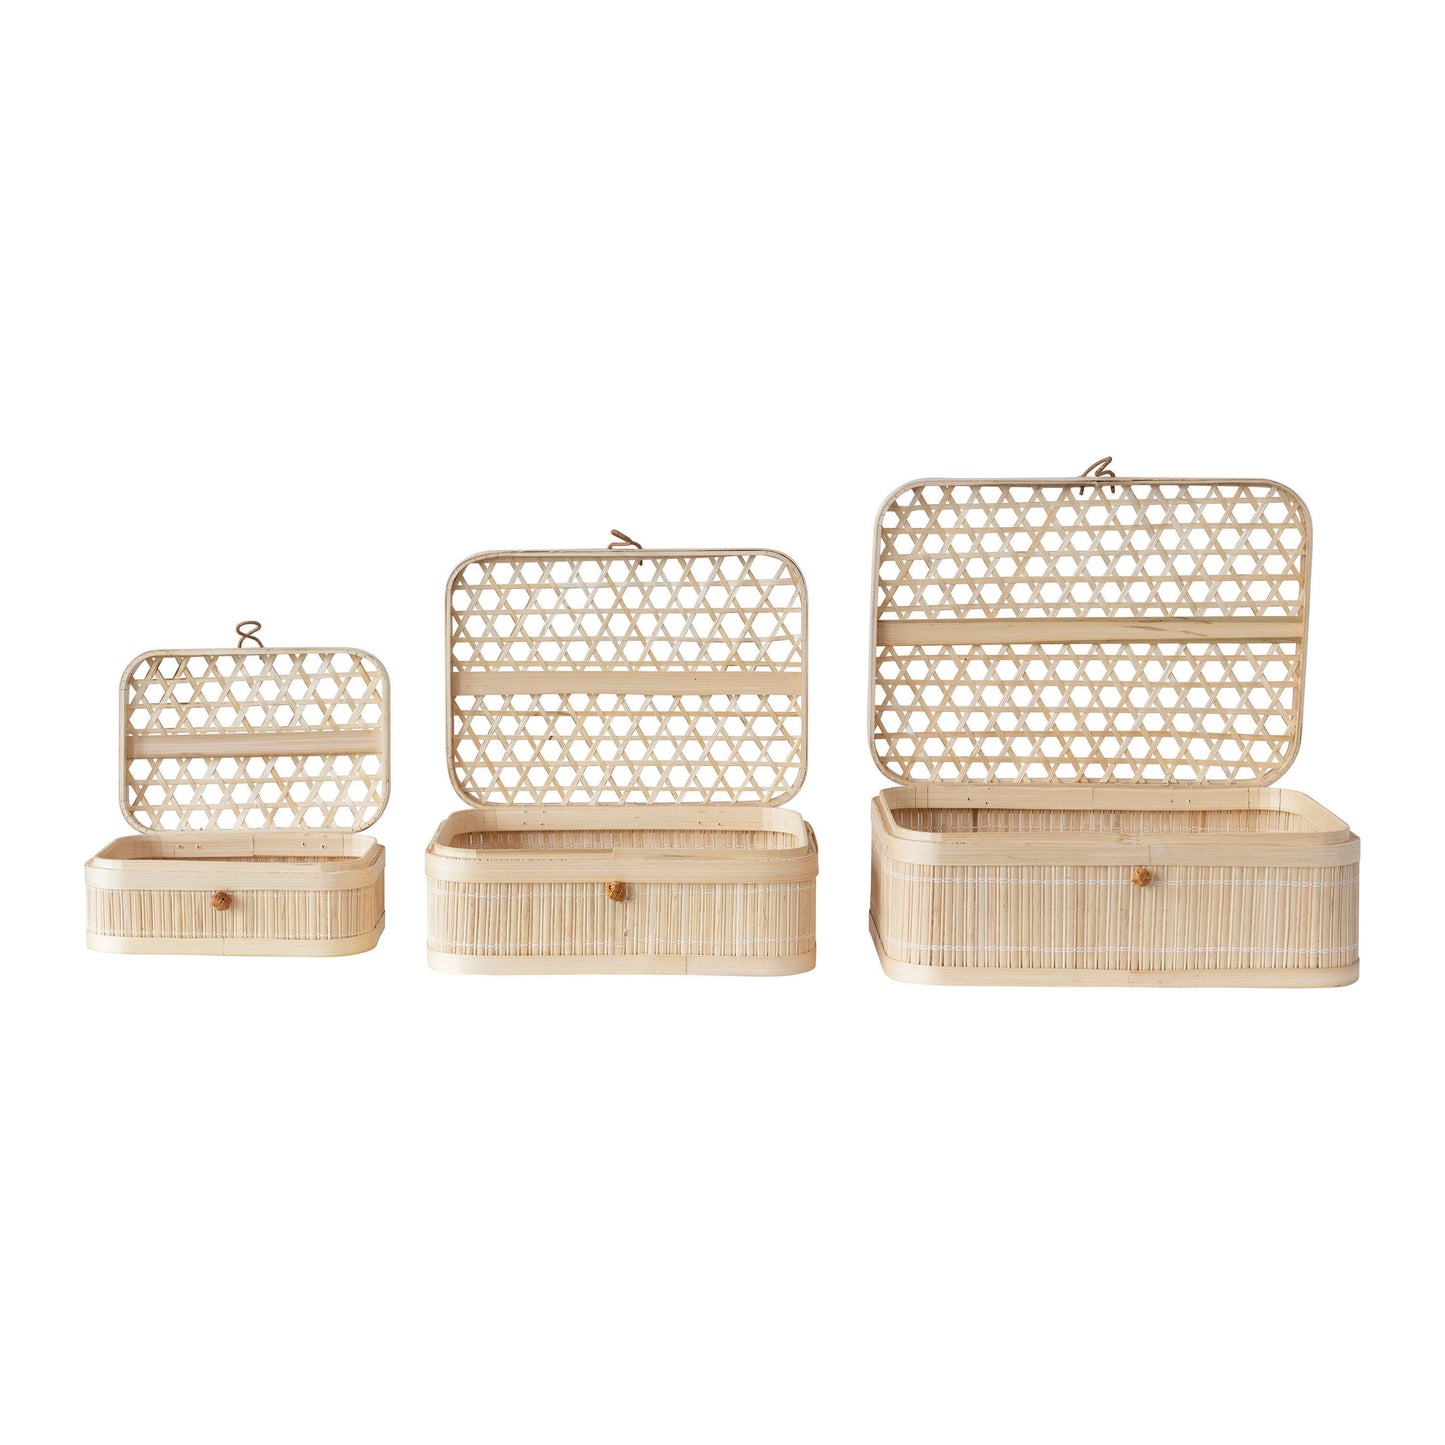 Hand-Woven Bamboo Boxes with Closures